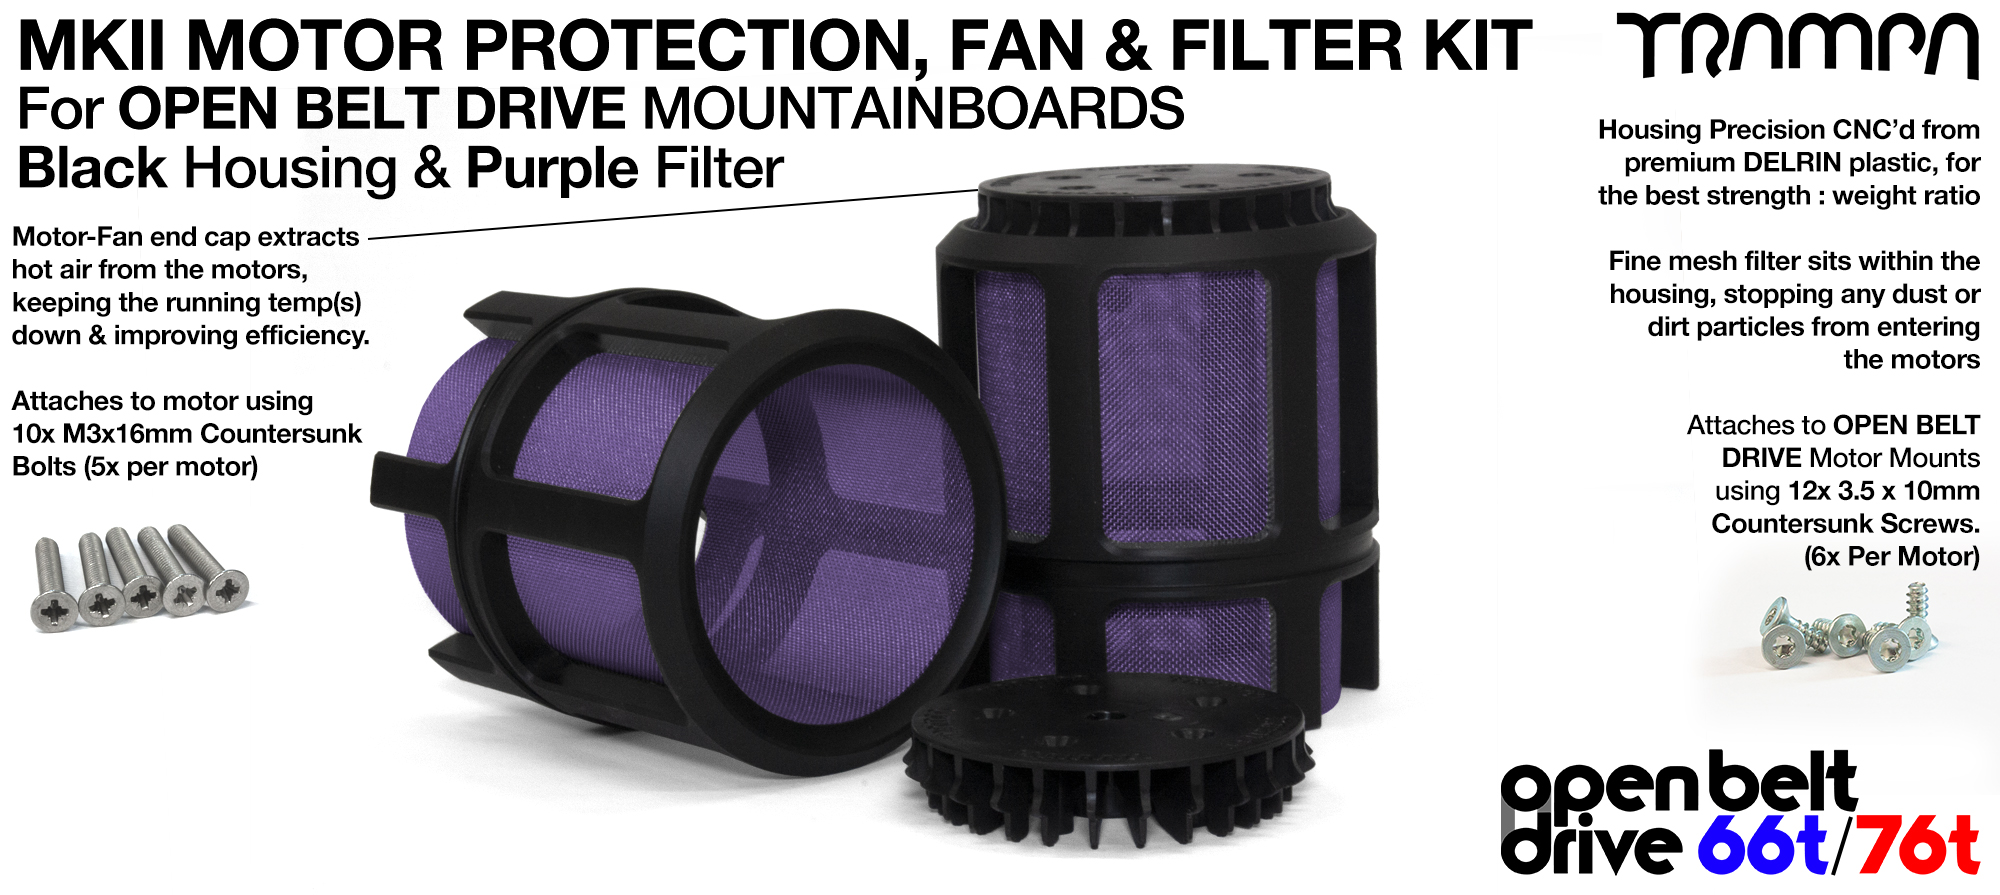 2x OBD MKII Motor protection Sleeve BLACK with PURPLE Filter 